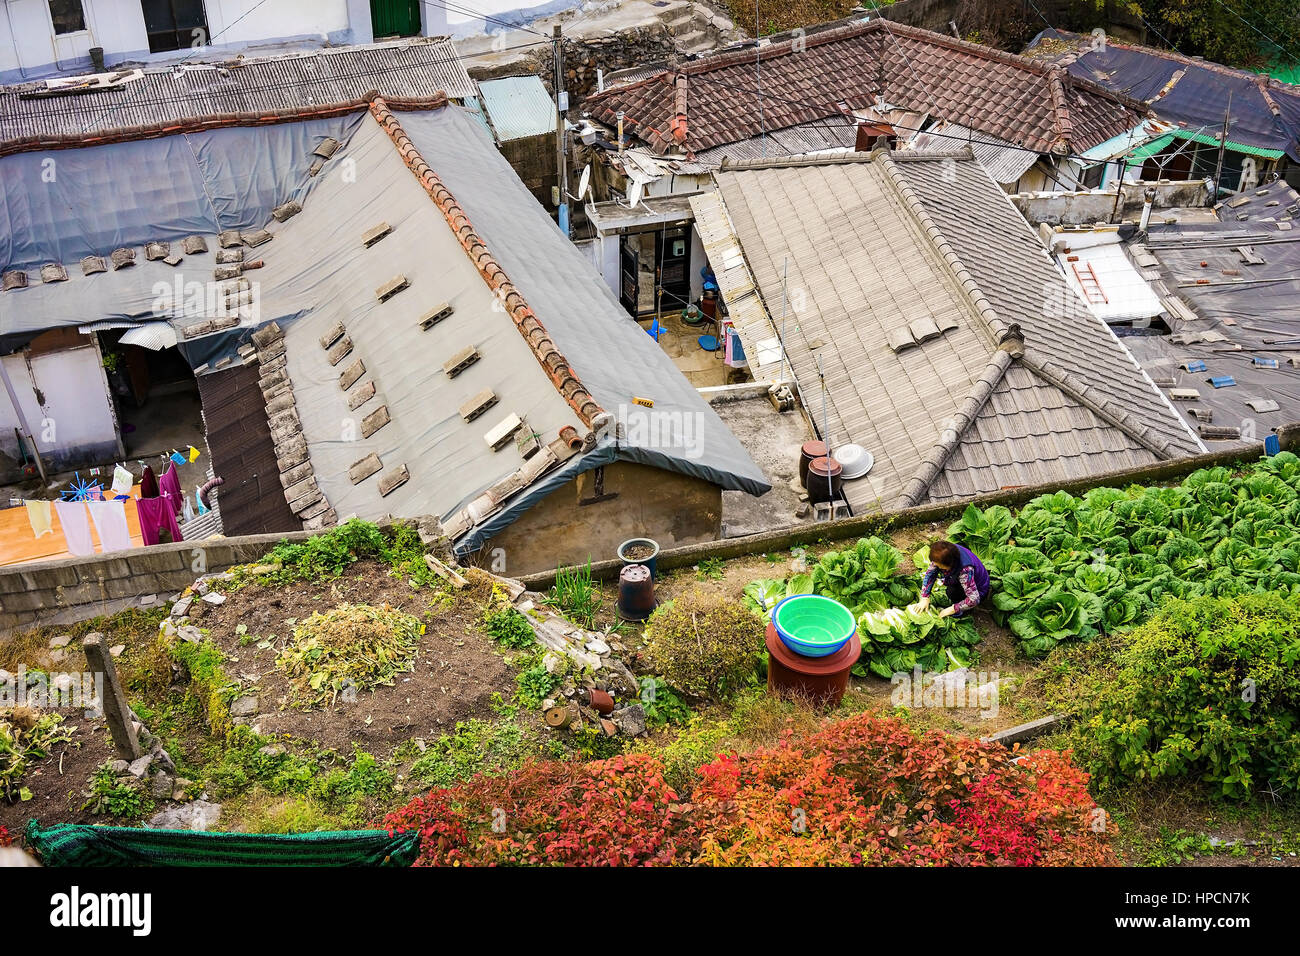 Residential area in Seoul with small farm Stock Photo